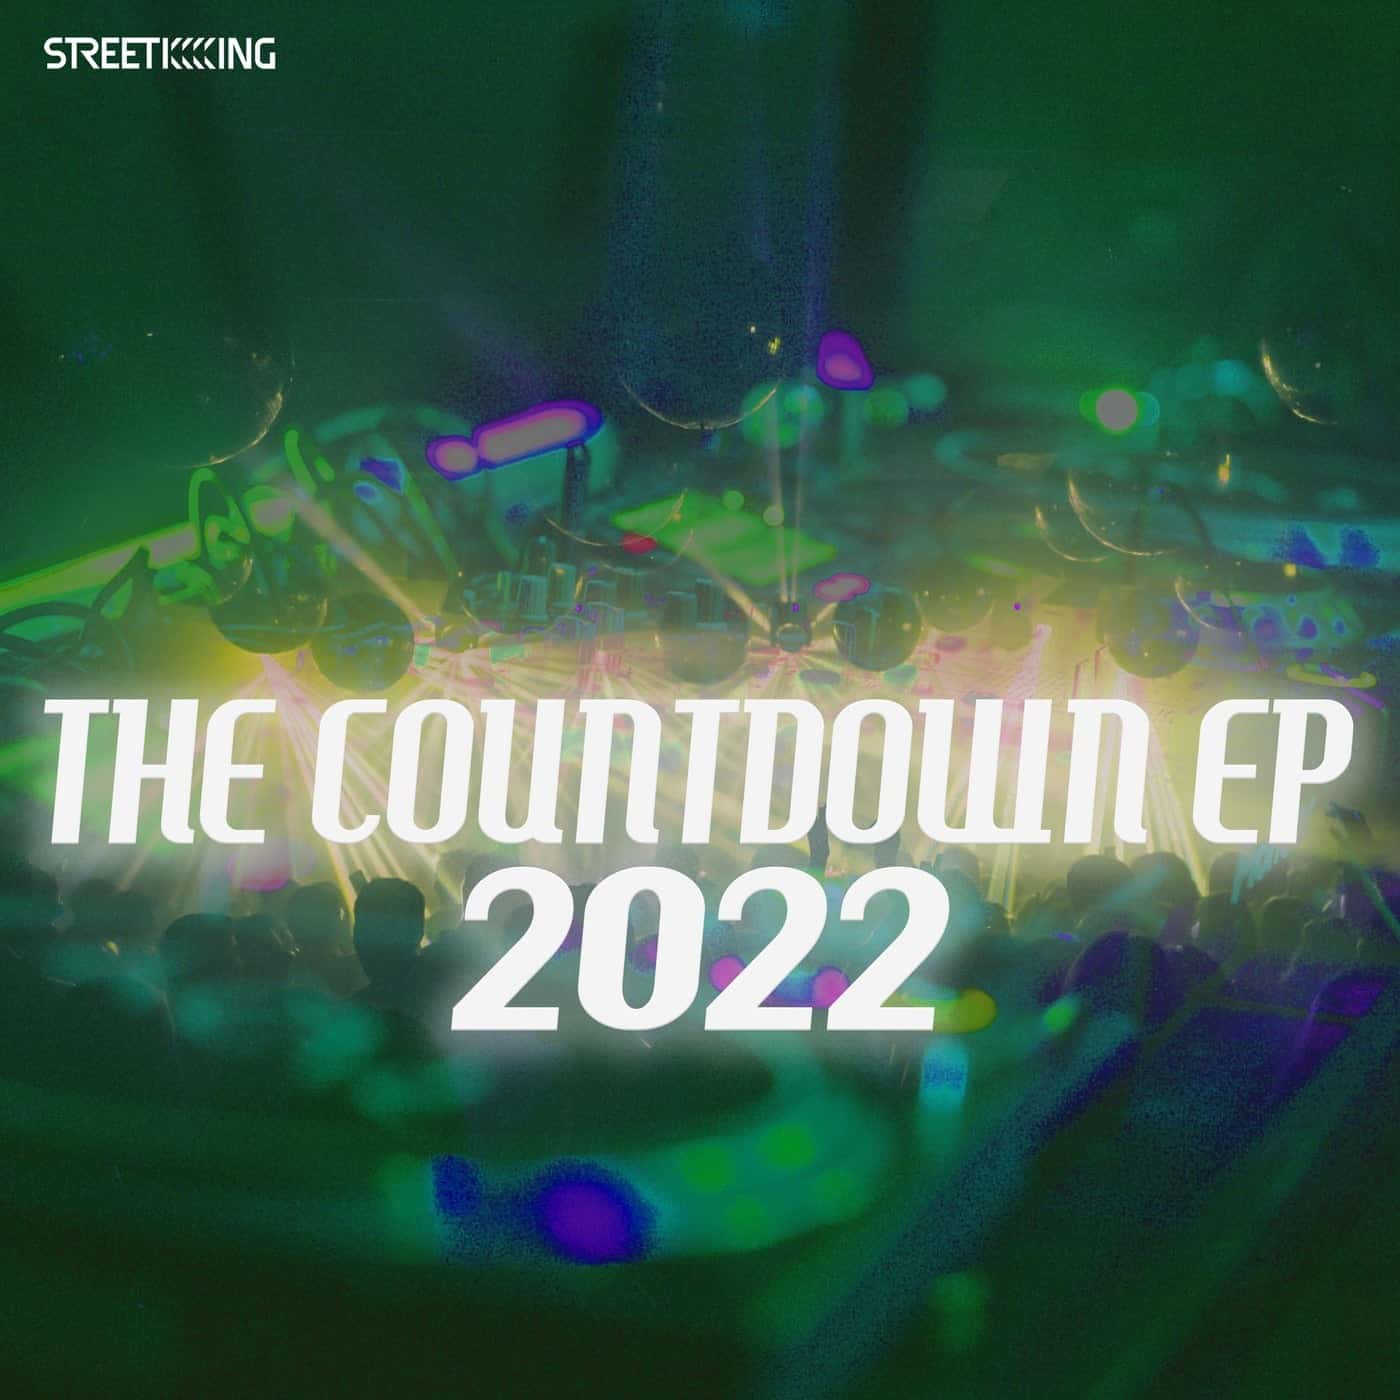 Download Street King Presents The Countdown EP 2 on Electrobuzz